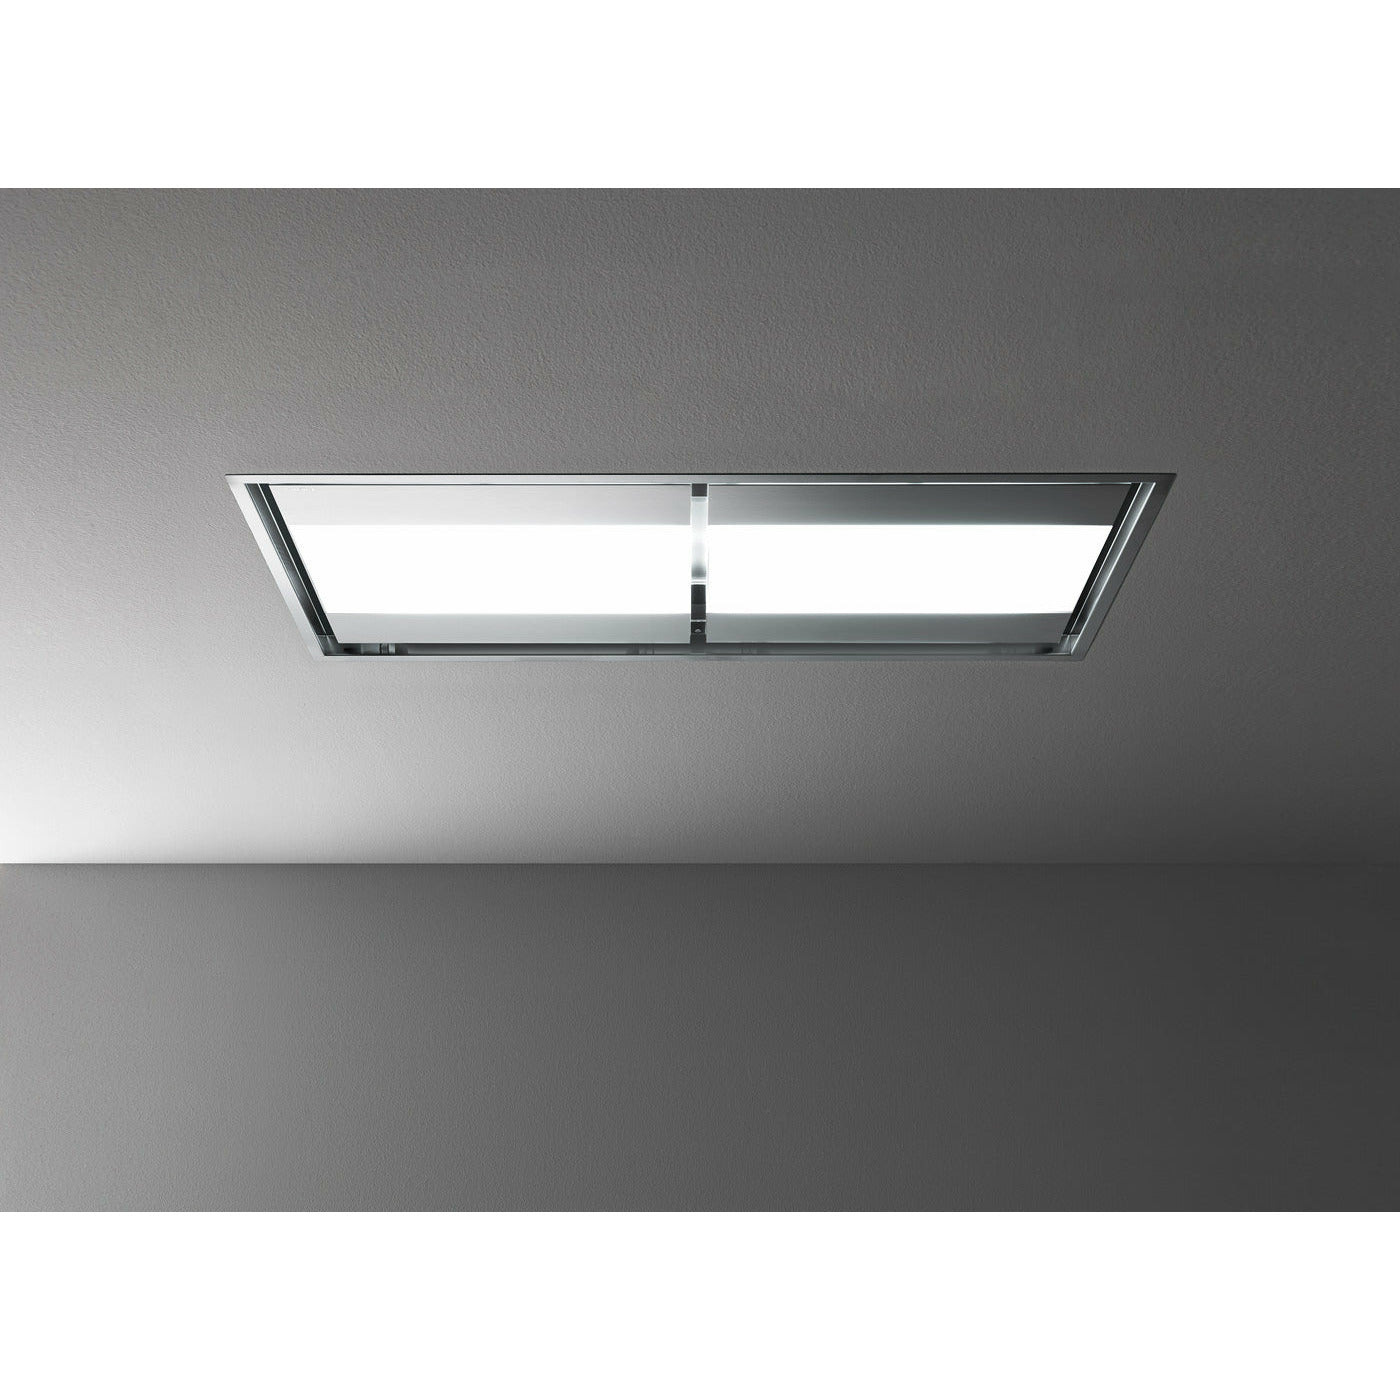 Falmec Nuvola 55" Ceiling Liner Only (Motor Not included) w/ Scotch brite stainless steel (AISI 304) , Tempered glass , Perimeter suction, LED and Remote control - FDNUV54C6SS-R1